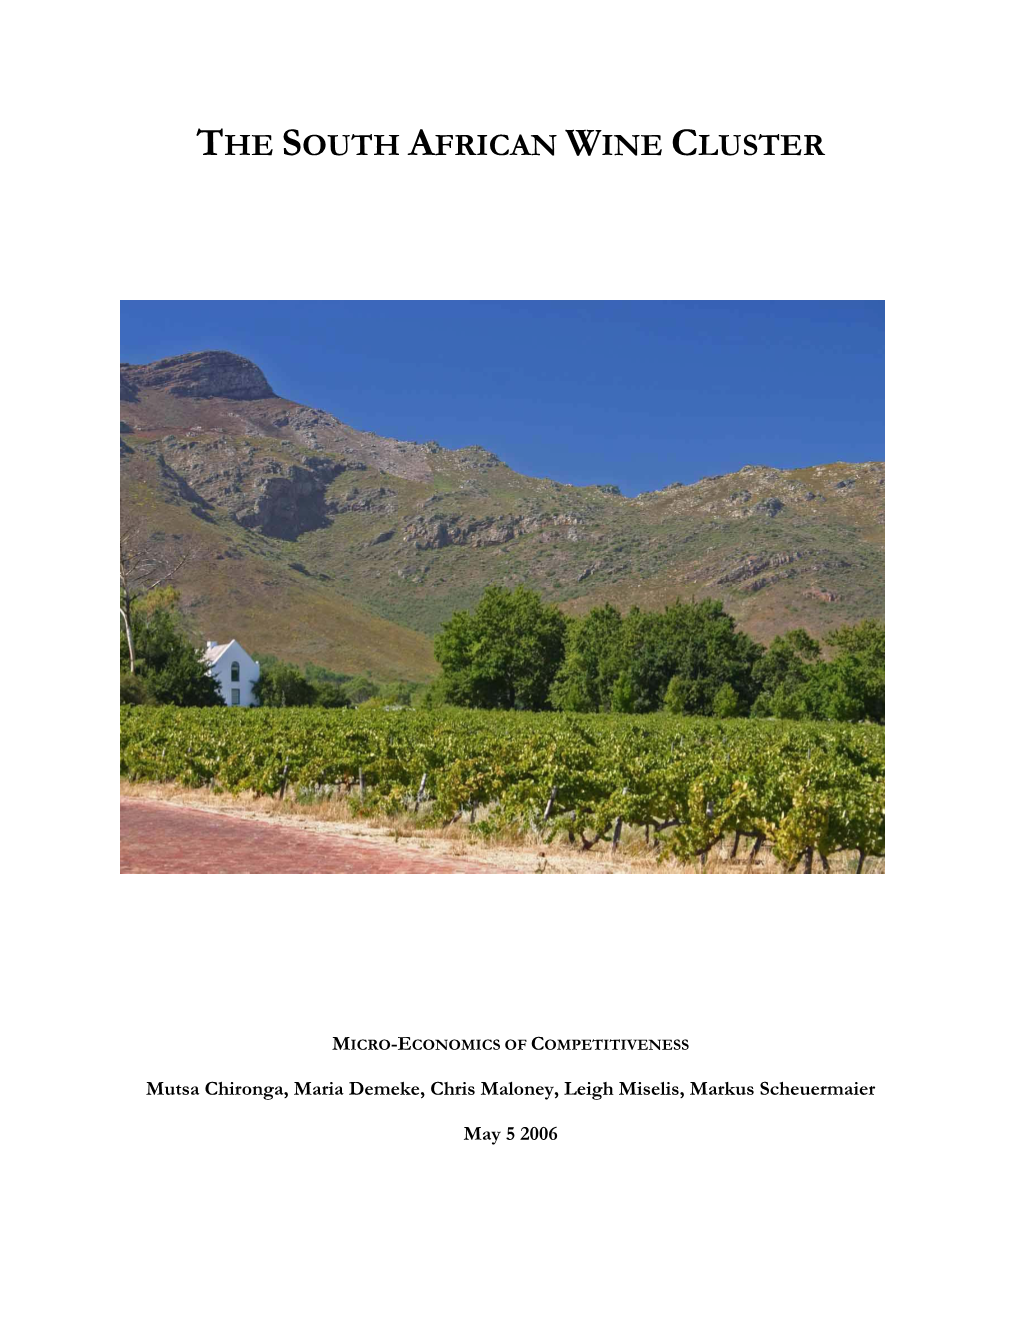 The South African Wine Cluster